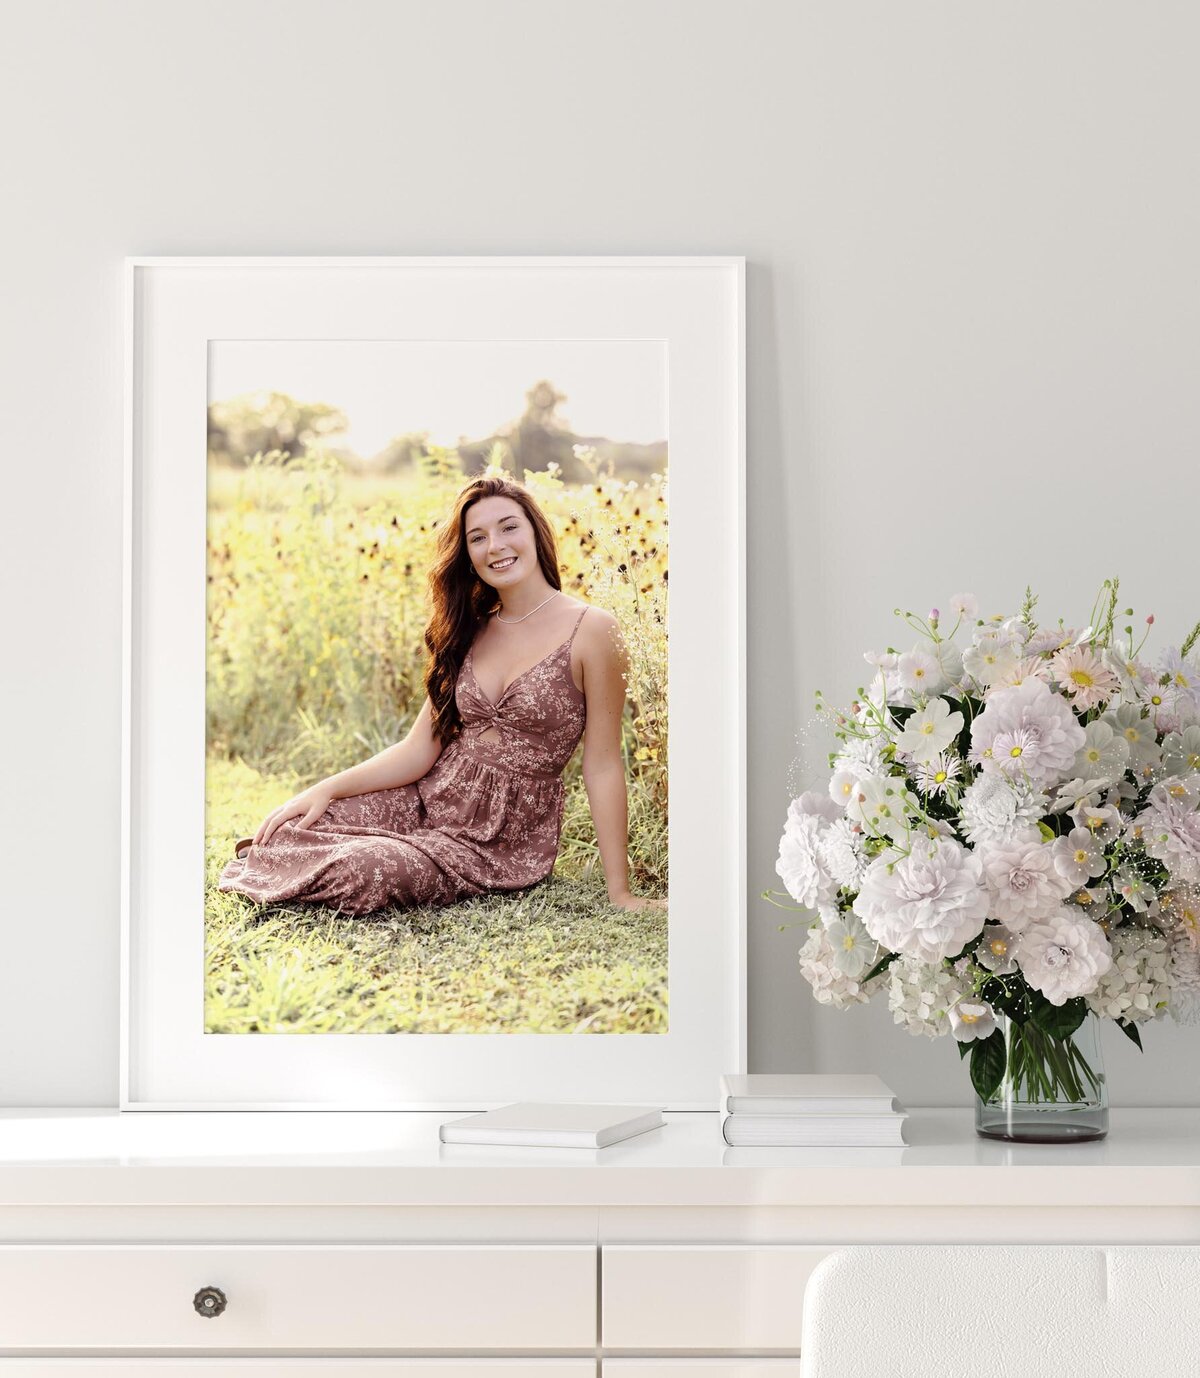 A portrait of a high school senior in a flower field. The framed picture sits on a white desk with a vase of white flowers next to it.